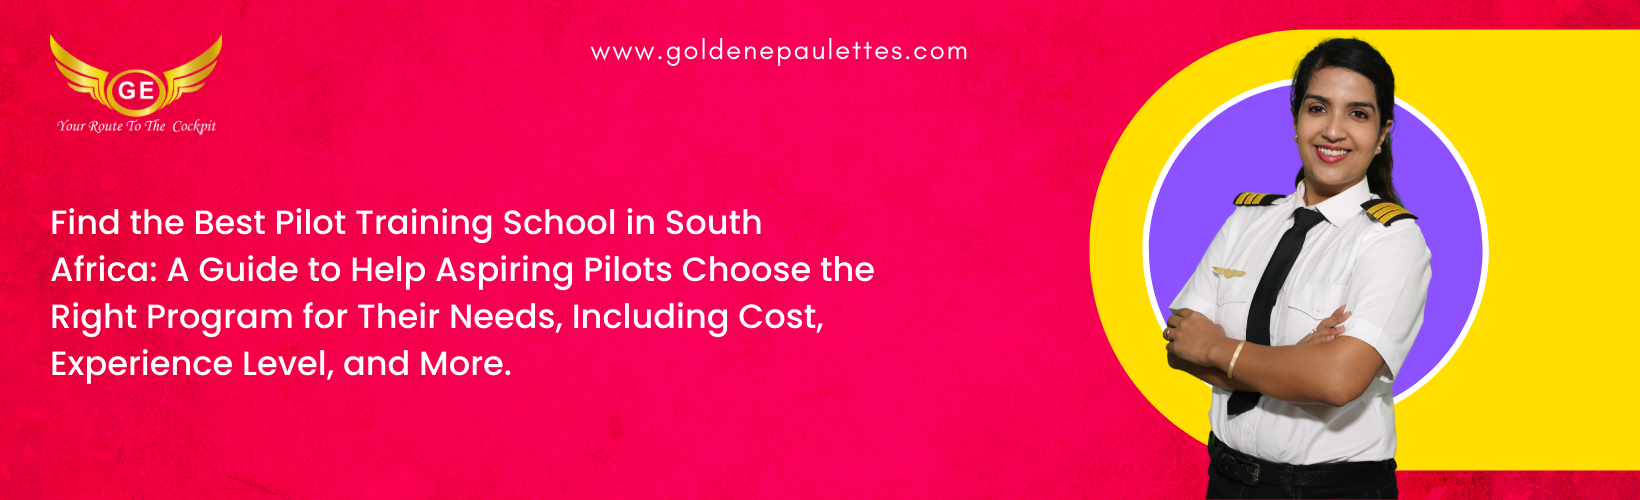 What to Look for in a Pilot Training School in South Africa